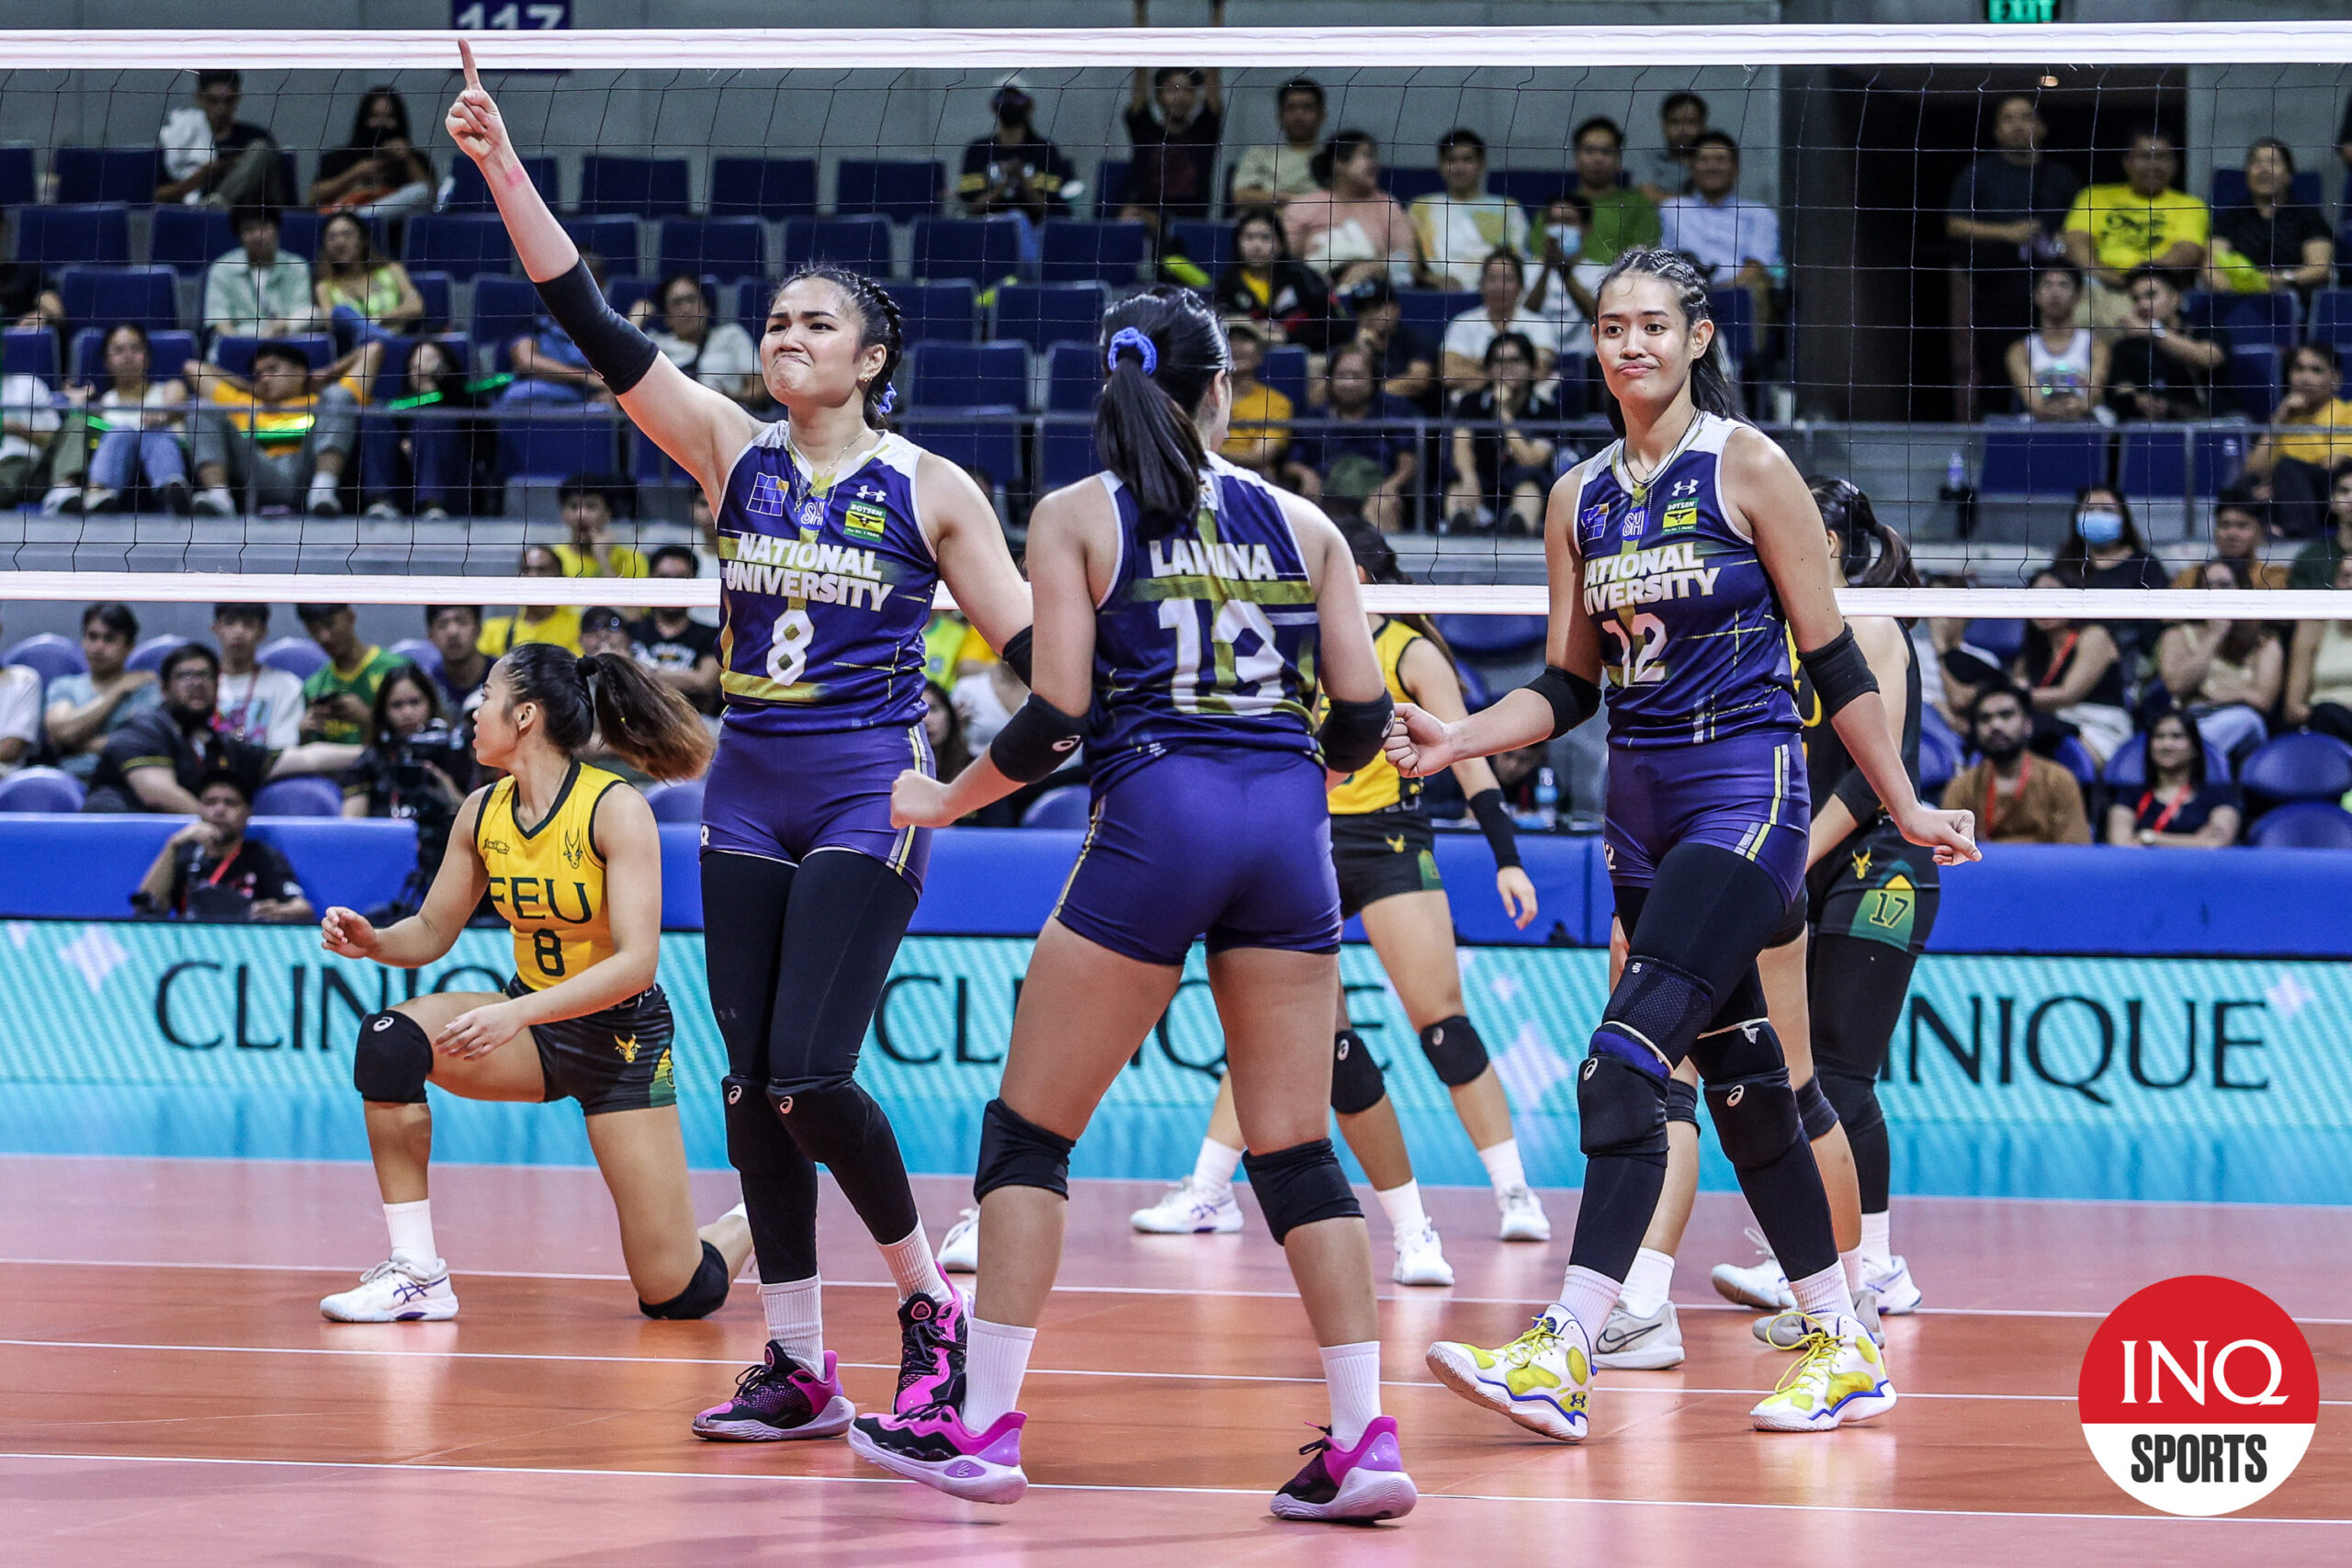 nu, ust forge finals duels in uaap men’s, women’s volleyball